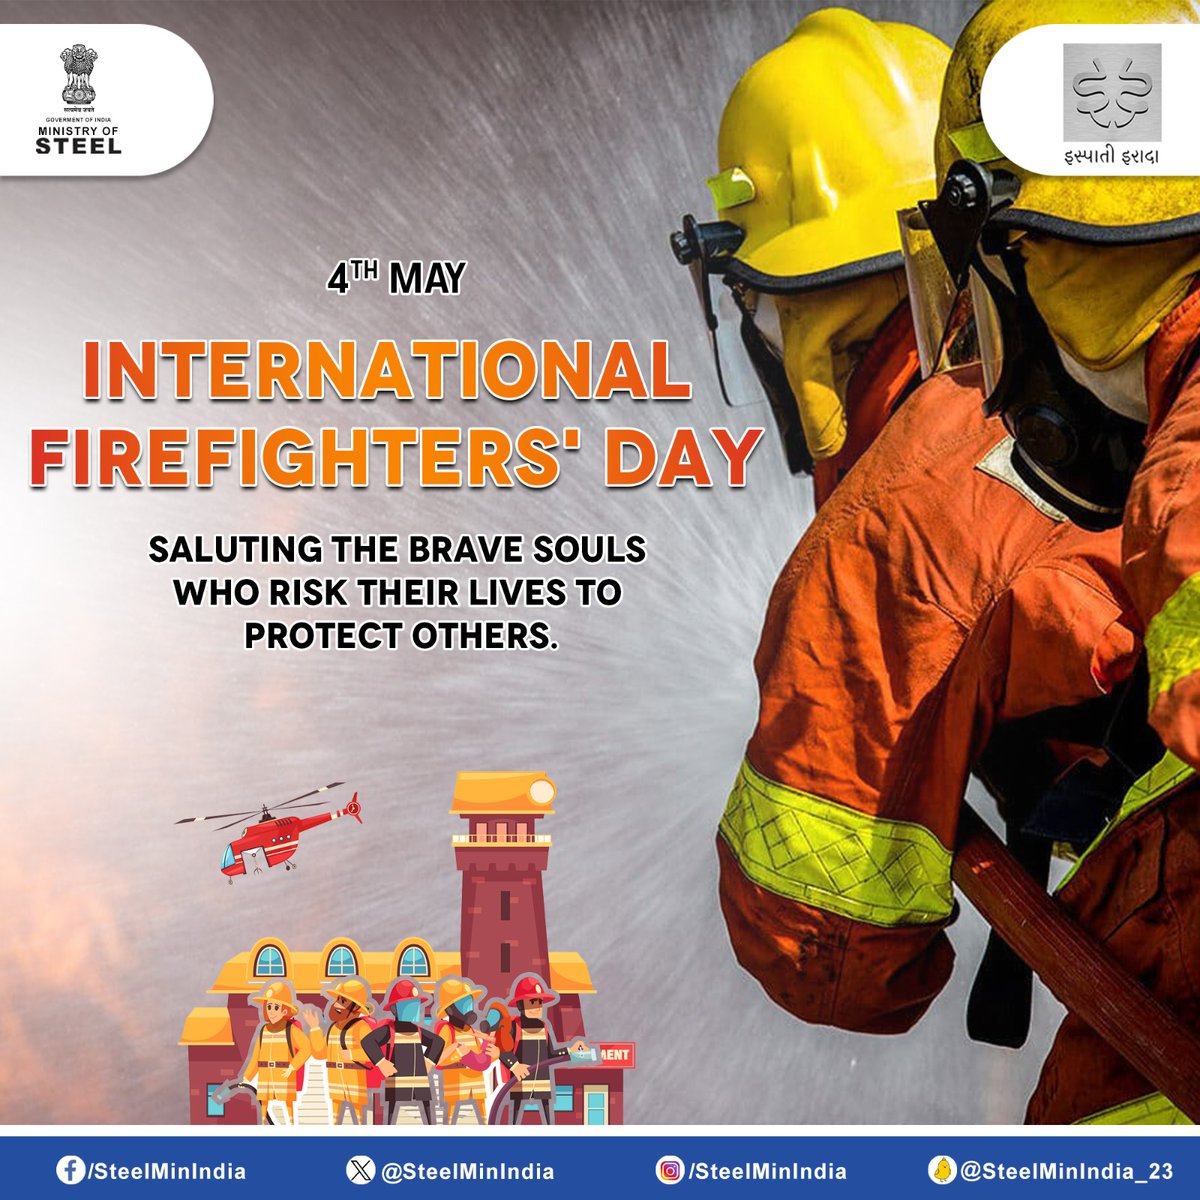 Saluting the courage and dedication of firefighters worldwide. Their unwavering commitment to protecting lives and communities is truly inspiring.🧑‍🚒 #InternationalFirefightersDay #Bravery